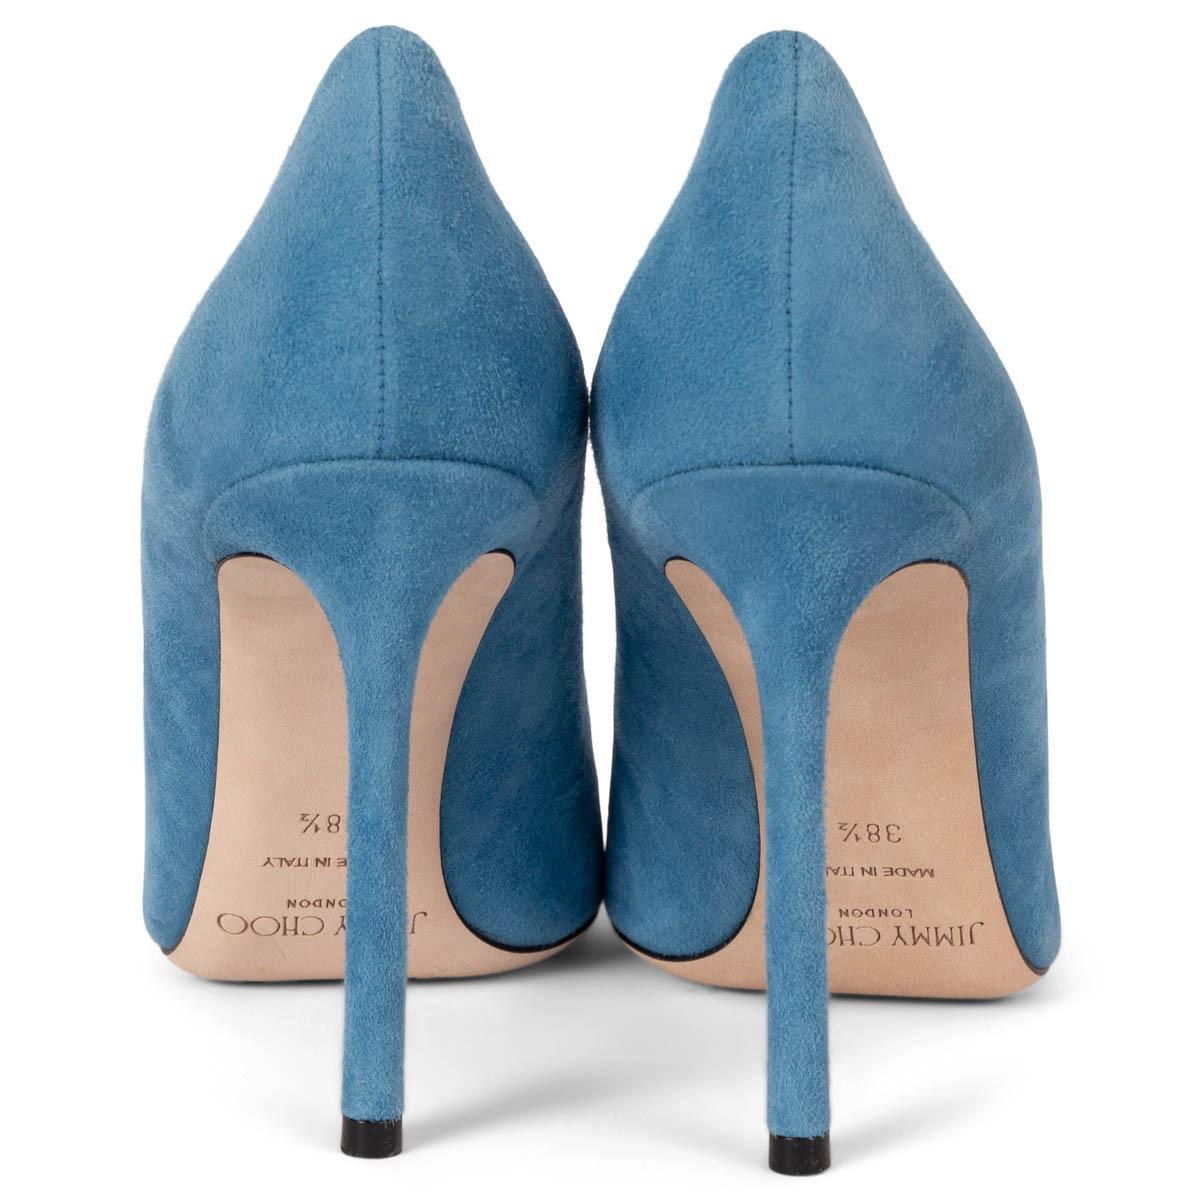 JIMMY CHOO Robot blue suede ROMY 100 Pumps Shoes 38.5 For Sale 1